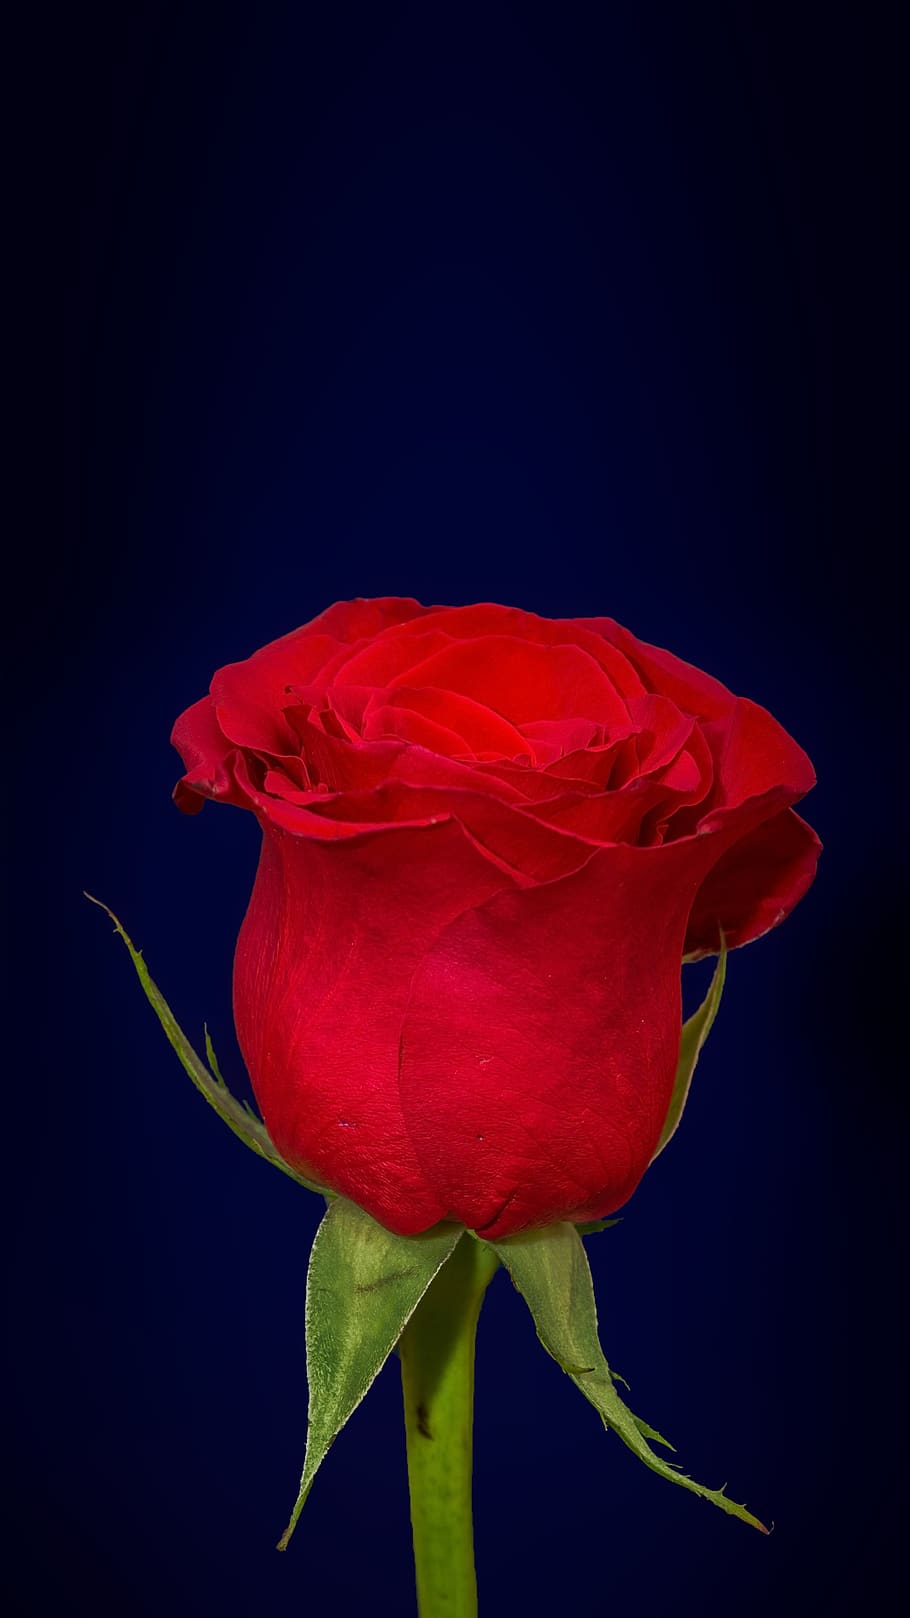 10000 Red Rose Pictures and Images for Free  Pixabay